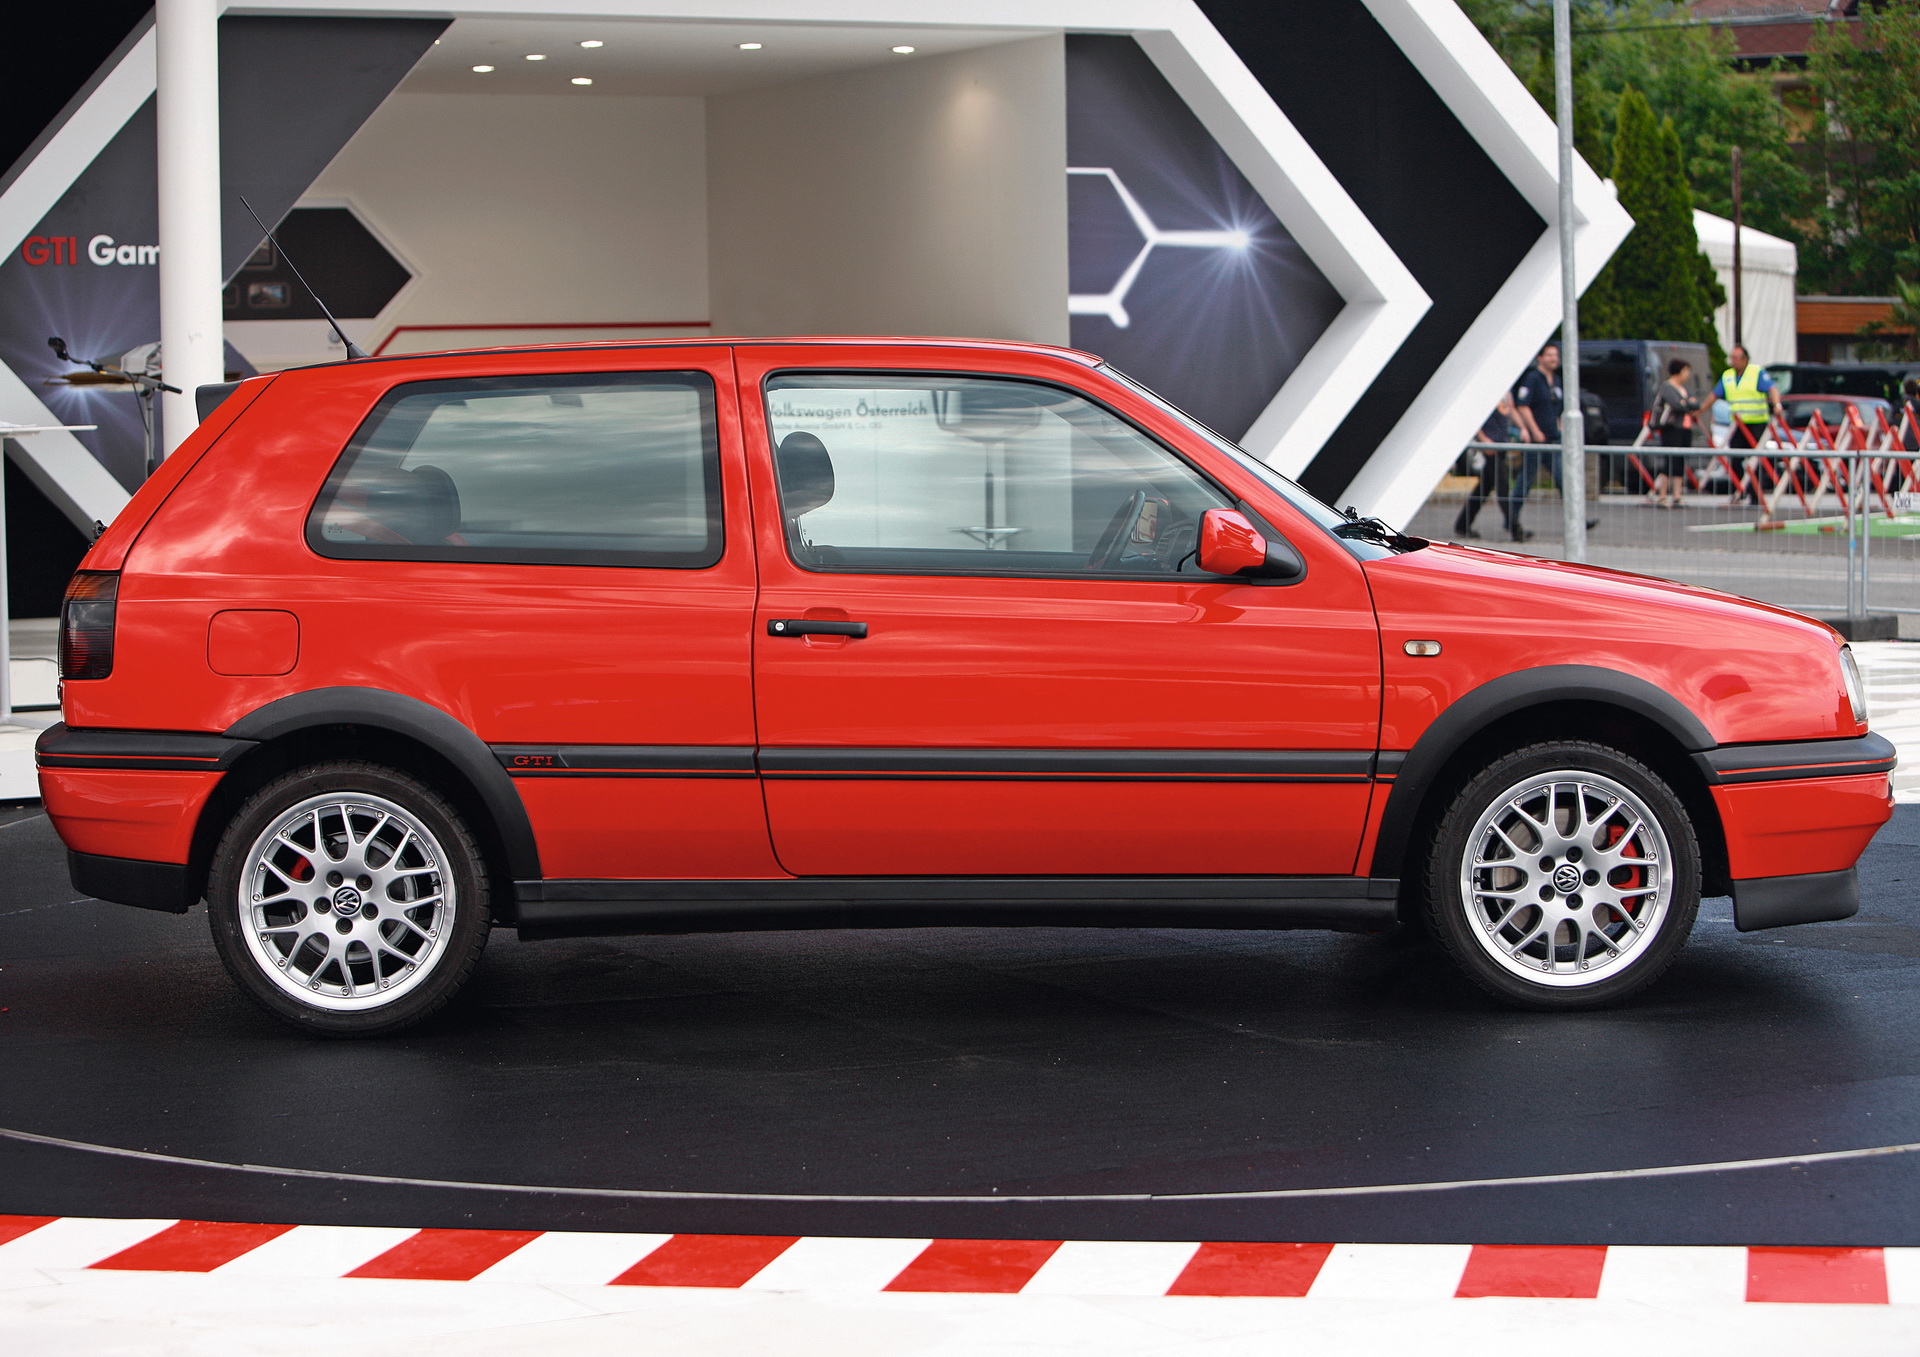 VW Golf Countdown: 1991-1996 Mk3 Was Full Of Safety Firsts But Not